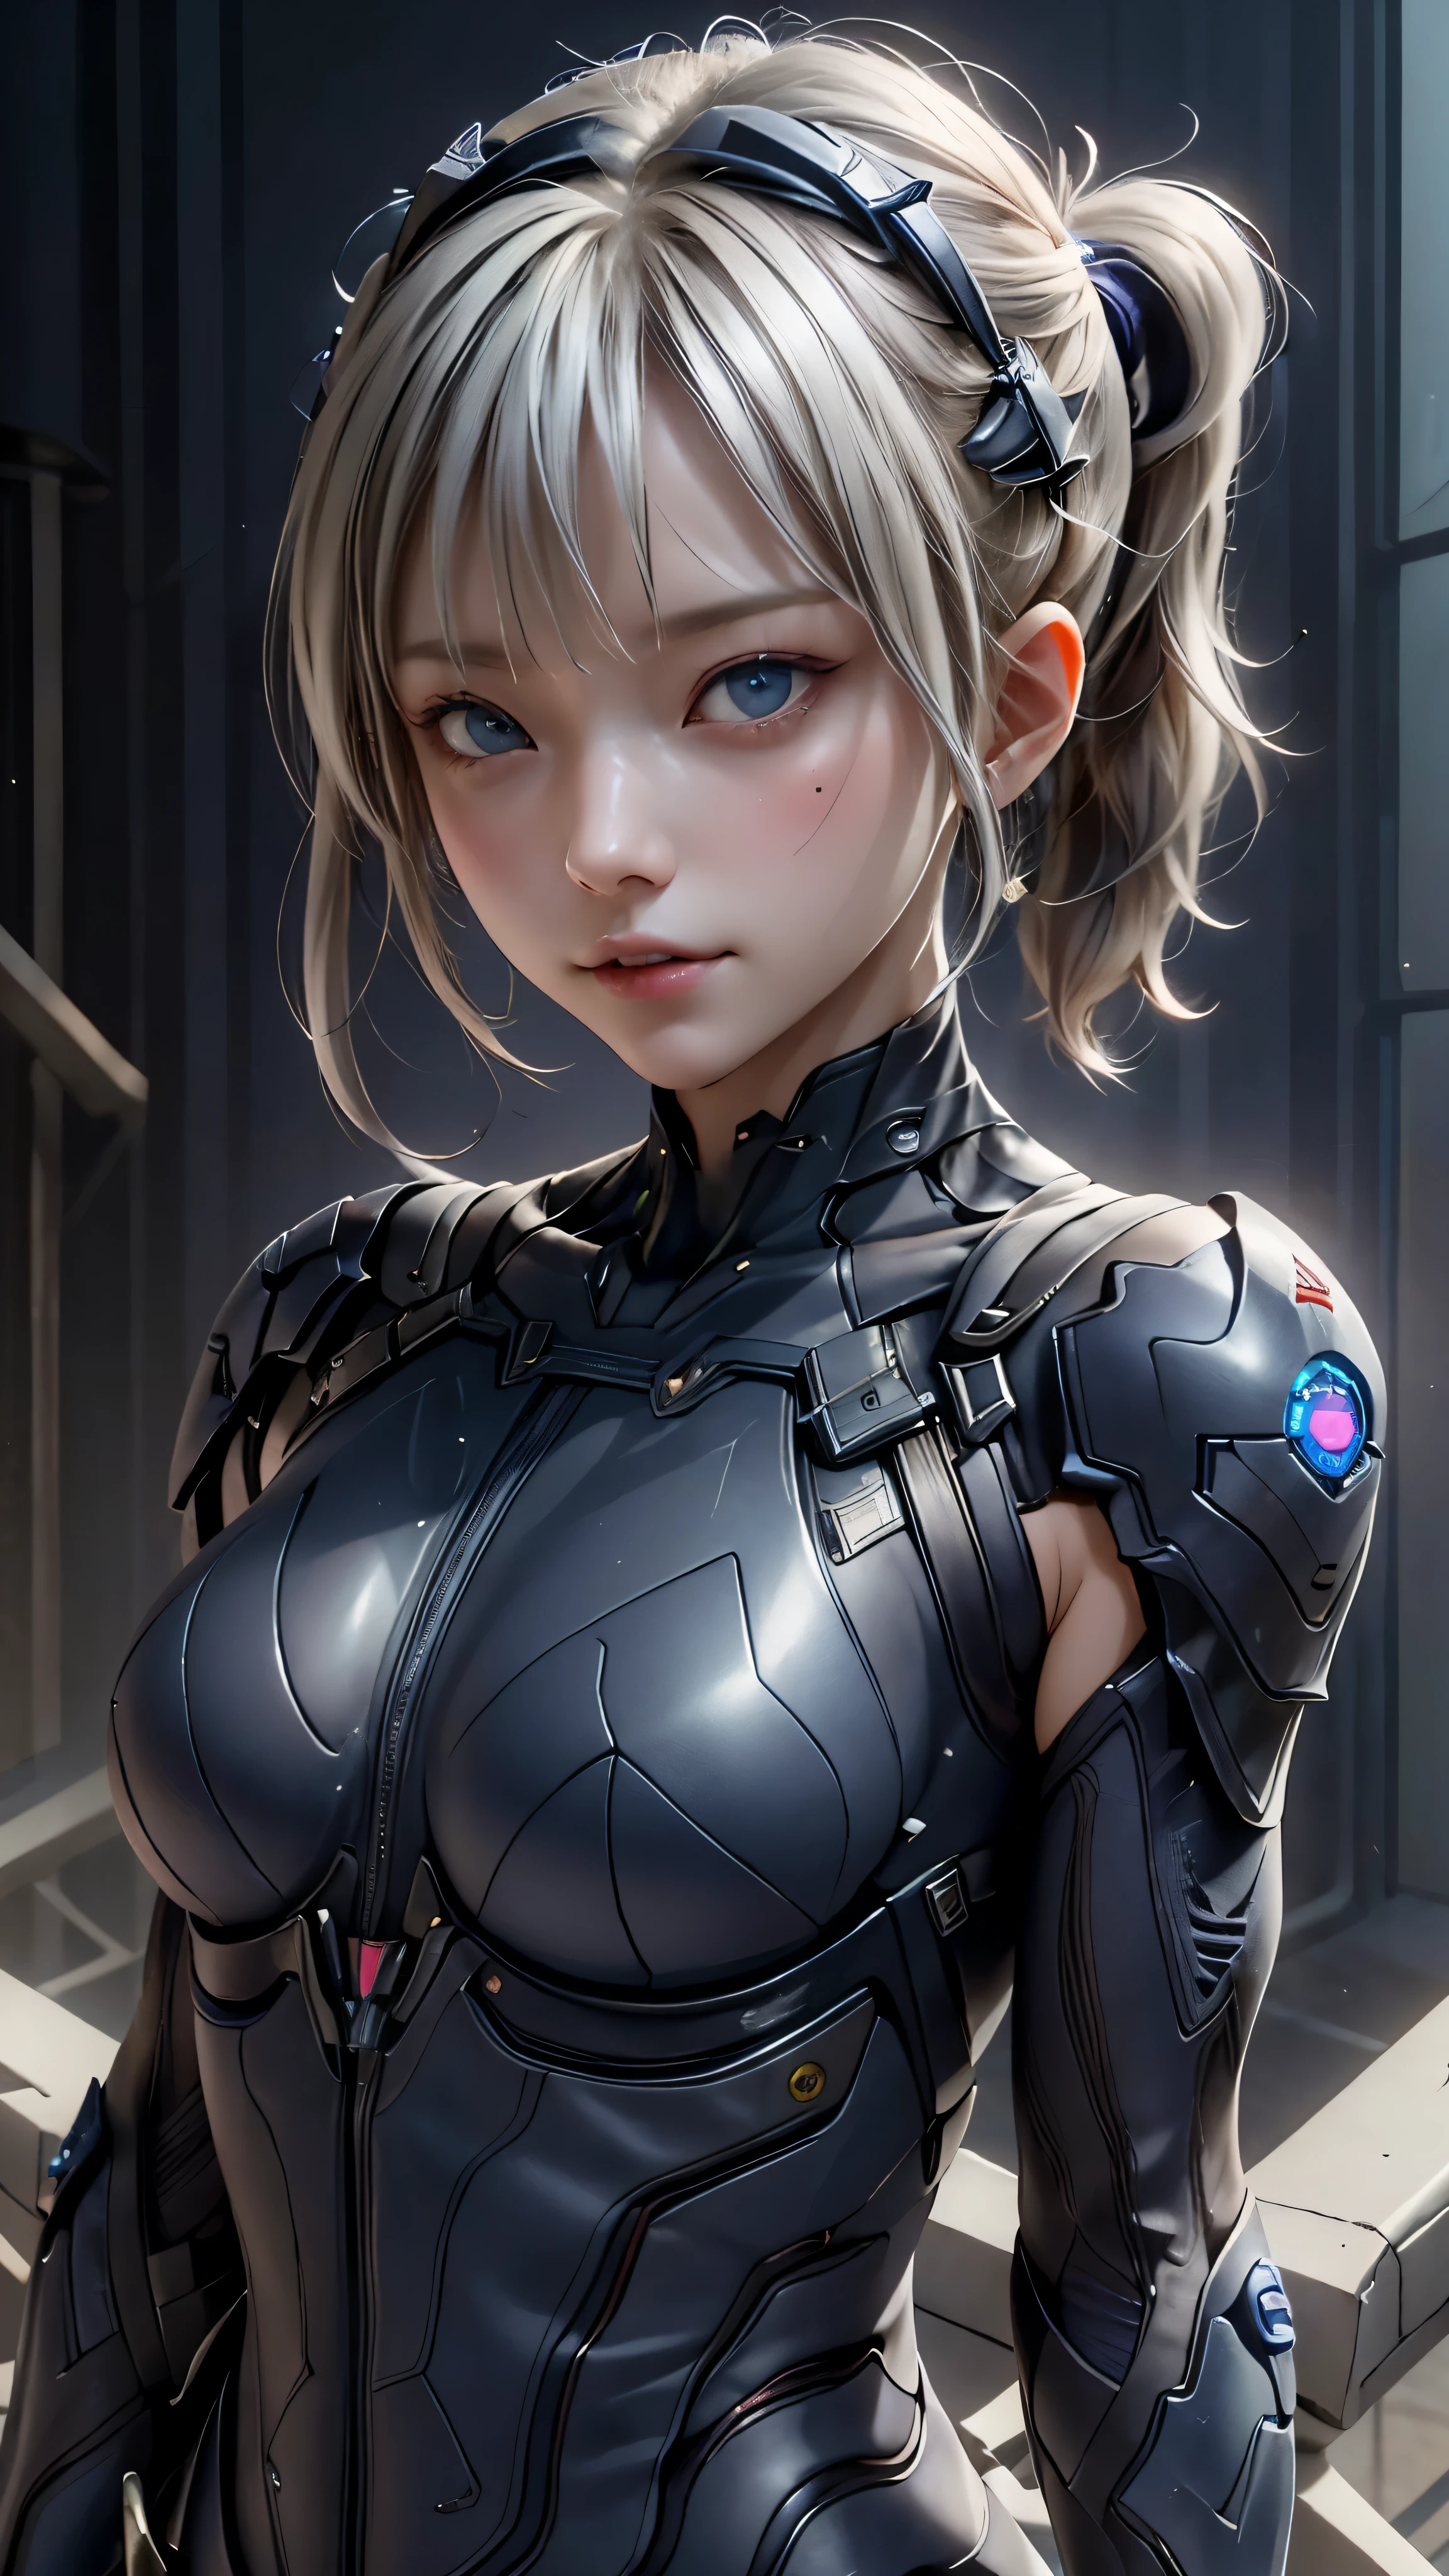 ((highest quality)), ((masterpiece)), (be familiar with:1.4), 。.。.。.3D, beautiful cyberpunk woman image,nffsw(high dynamic range),ray tracing,NVIDIA RTX,super resolution,unreal 5,scattered below the surface,PBR texturing,Post-processing,anisotropic filtering,written boundary depth,maximum clarity and sharpness,multilayer texture,Albedo and specular maps,surface shading,Accurate simulation of light-matter interactions,perfect proportions,octane rendering,two-tone lighting,wide aperture,Low ISO、White balance、Rule of thirds、8,000 students、(())(((White and navy blue clothing)))(((blonde)))